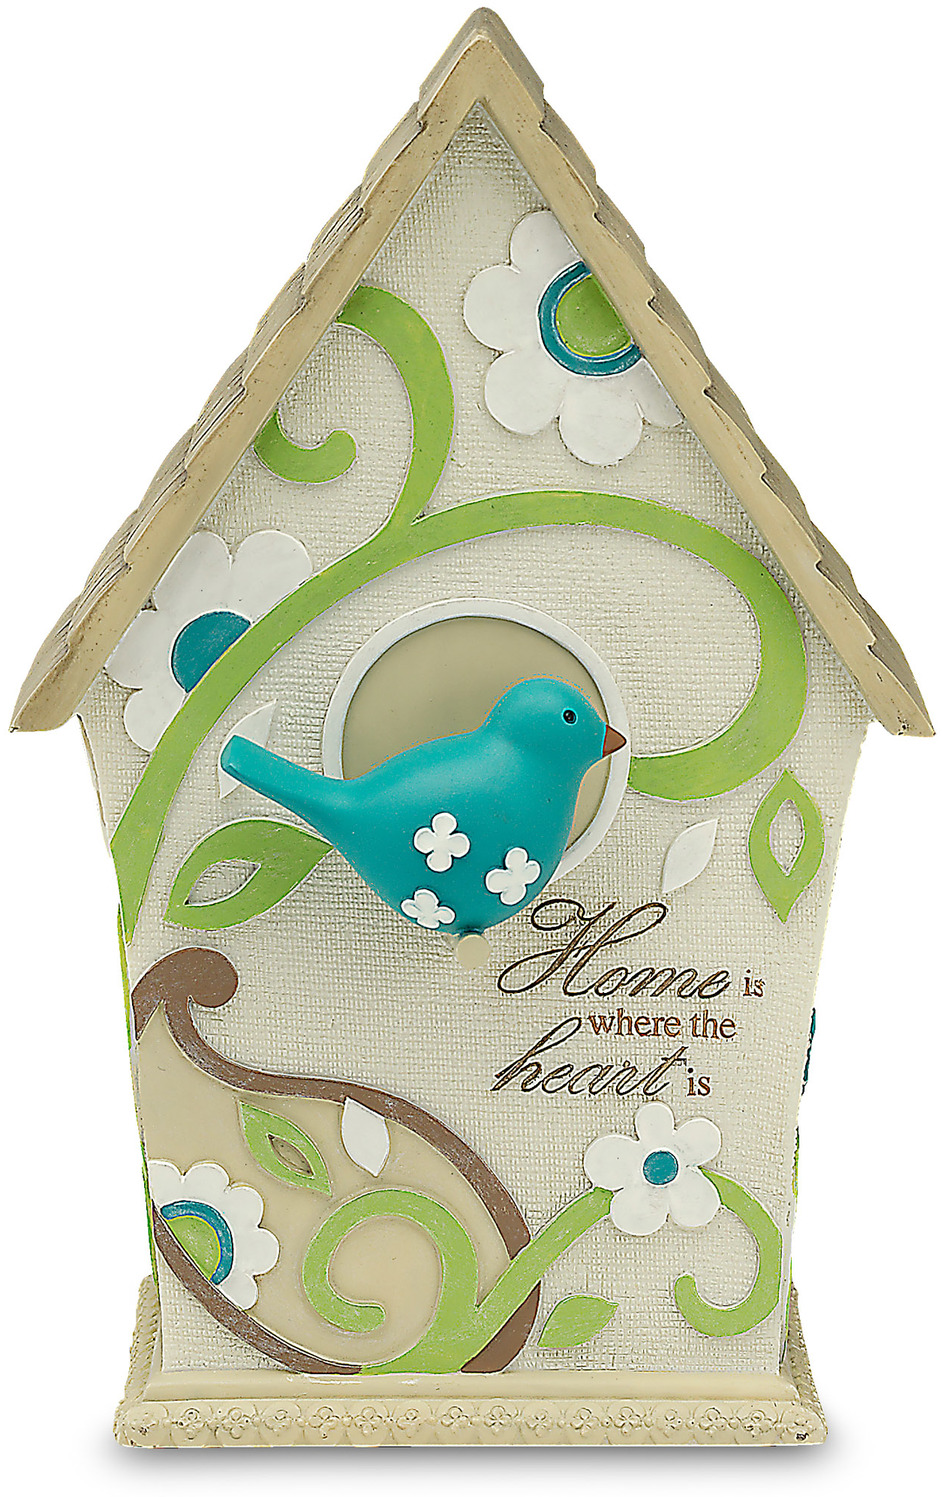 Pavilion Gift Company Perfectly Paisley Home Decorative Birdhouse, Inscription Home is Where The Heart is - image 1 of 3